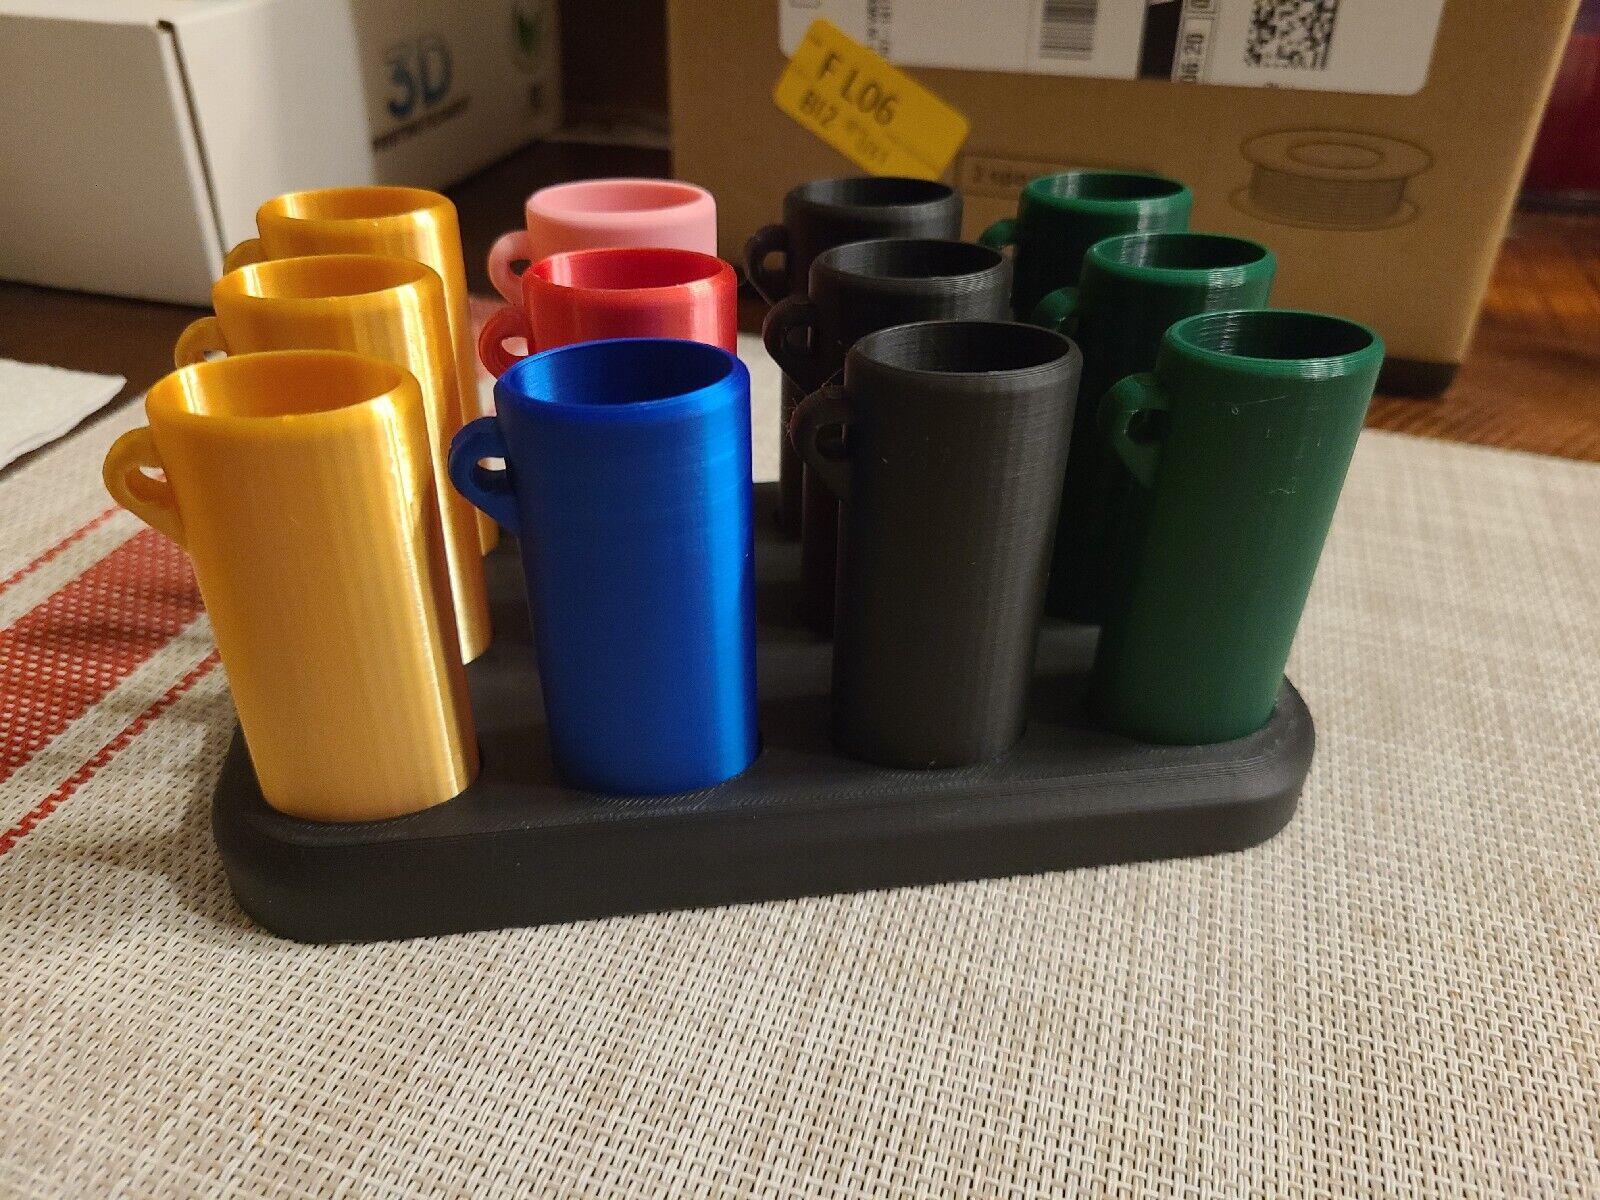 3D Printed Bic Lighter Covers Cases Keychains 12 Pack With Stand Plain Design